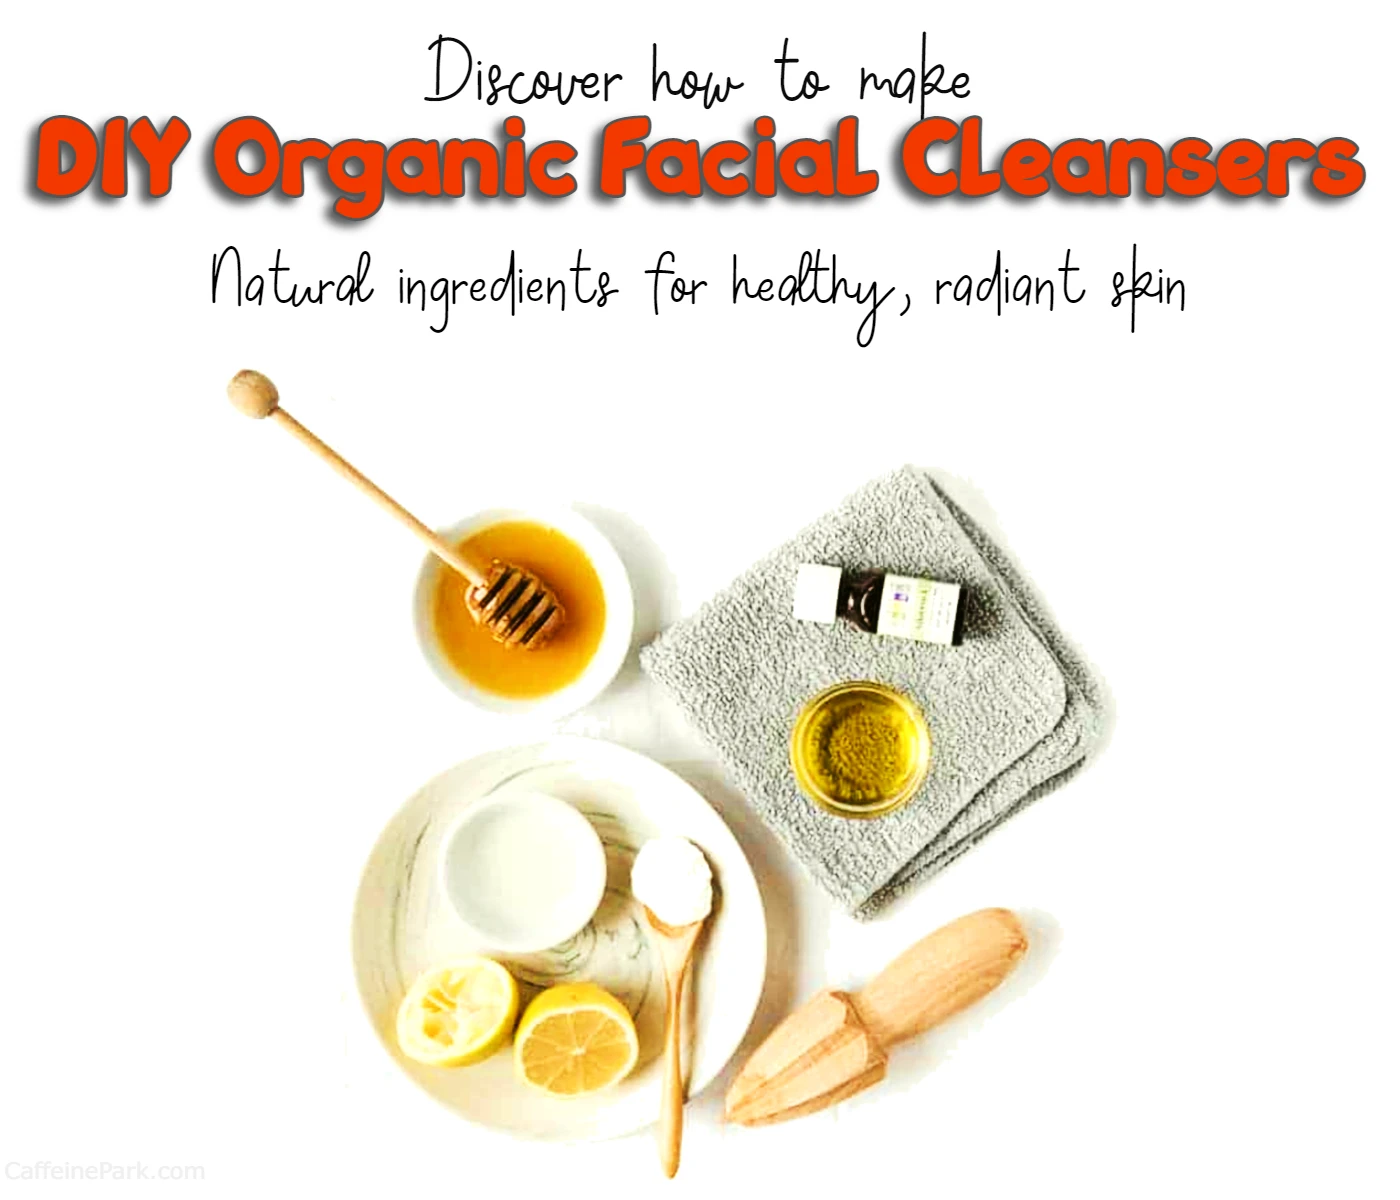 How To Make Organic Facial Cleansers